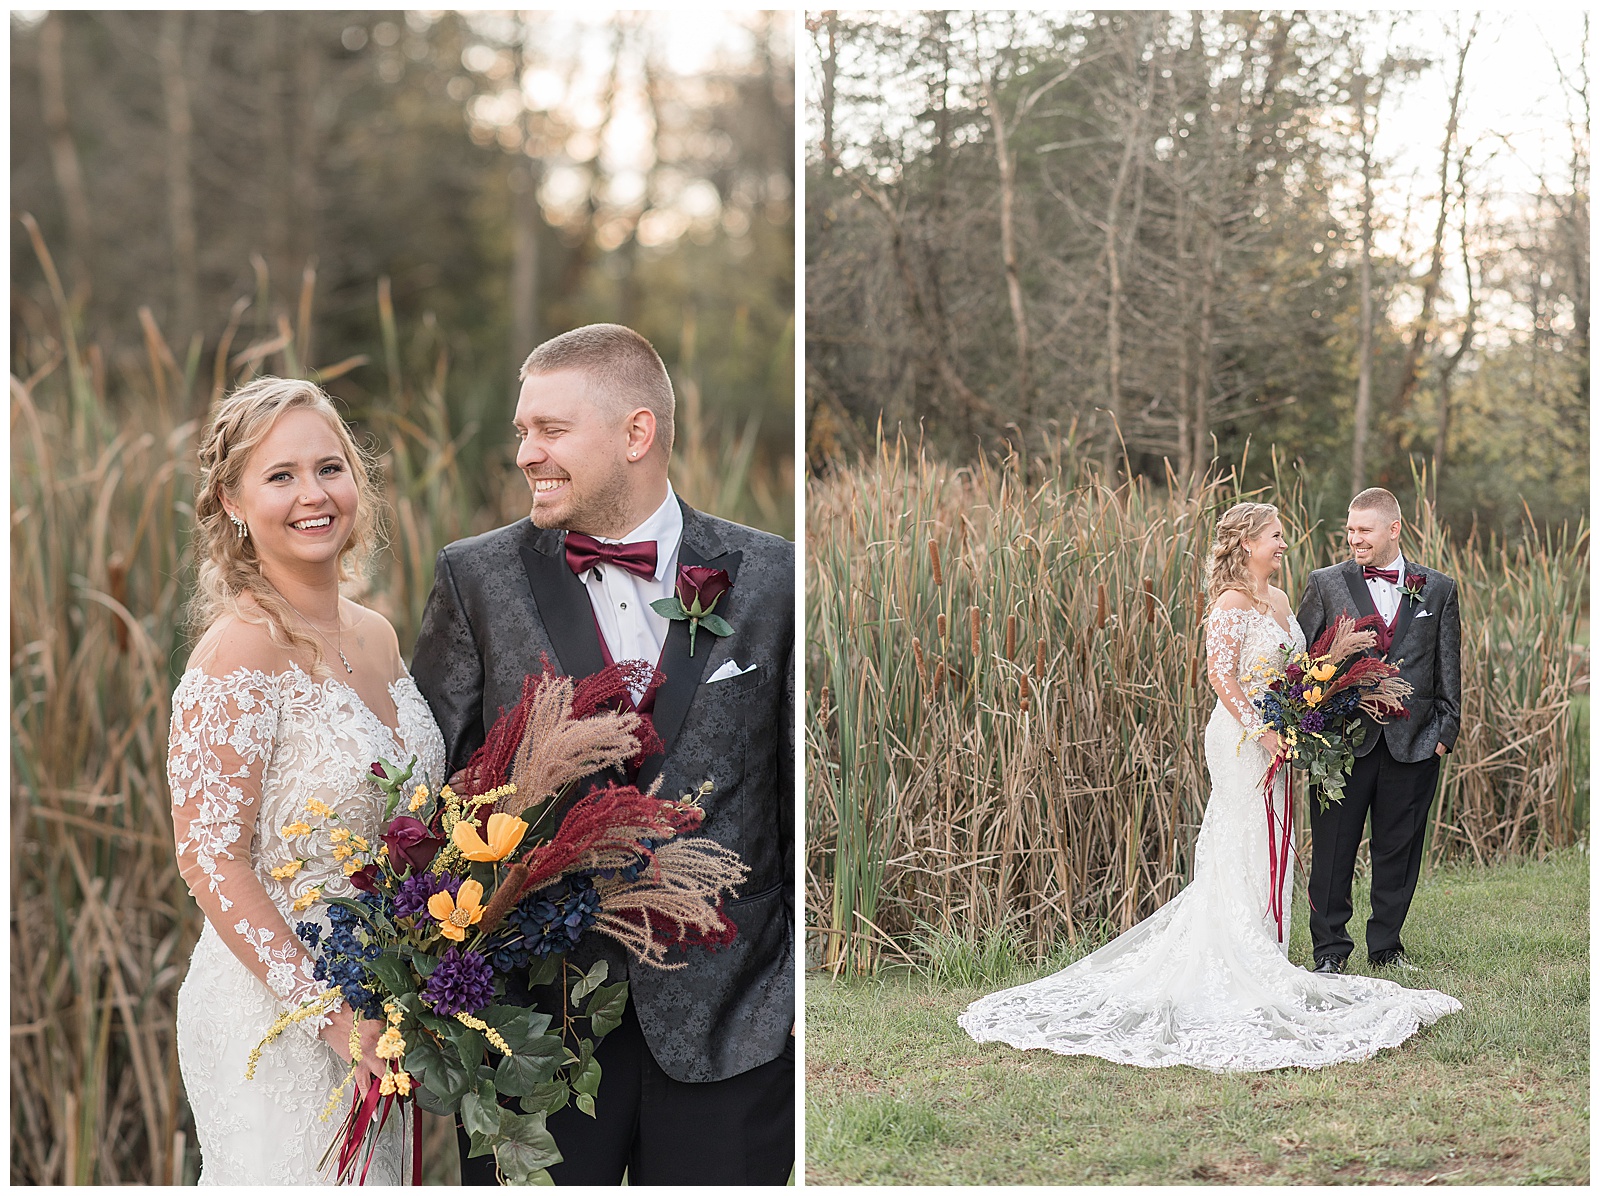 bride holding bouquet and smiling at camera as groom smiles and looks at her on cloudy fall day by corn field